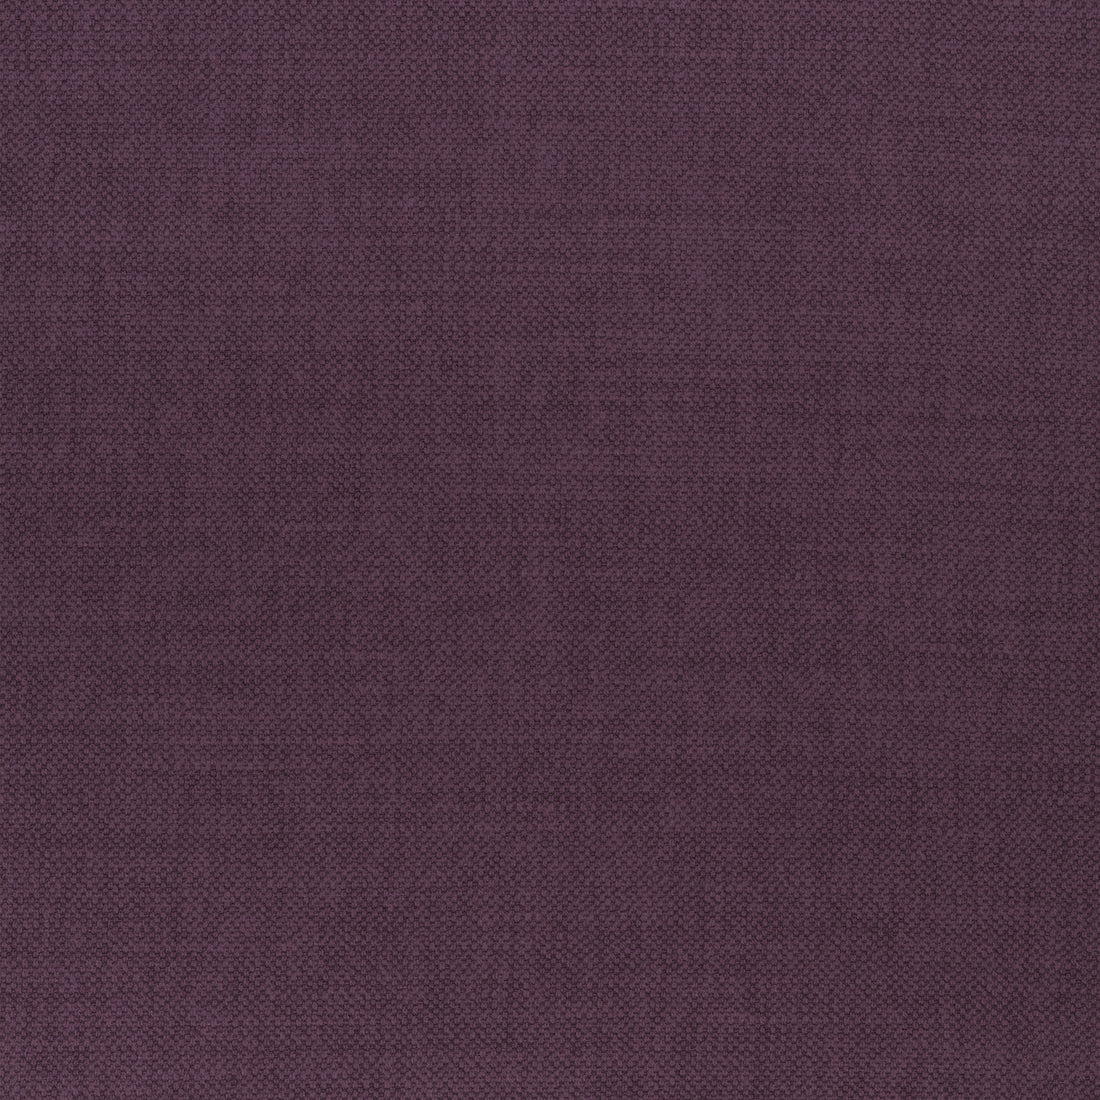 Prisma fabric in mulberry color - pattern number W70134 - by Thibaut in the Woven Resource Vol 12 Prisma Fabrics collection